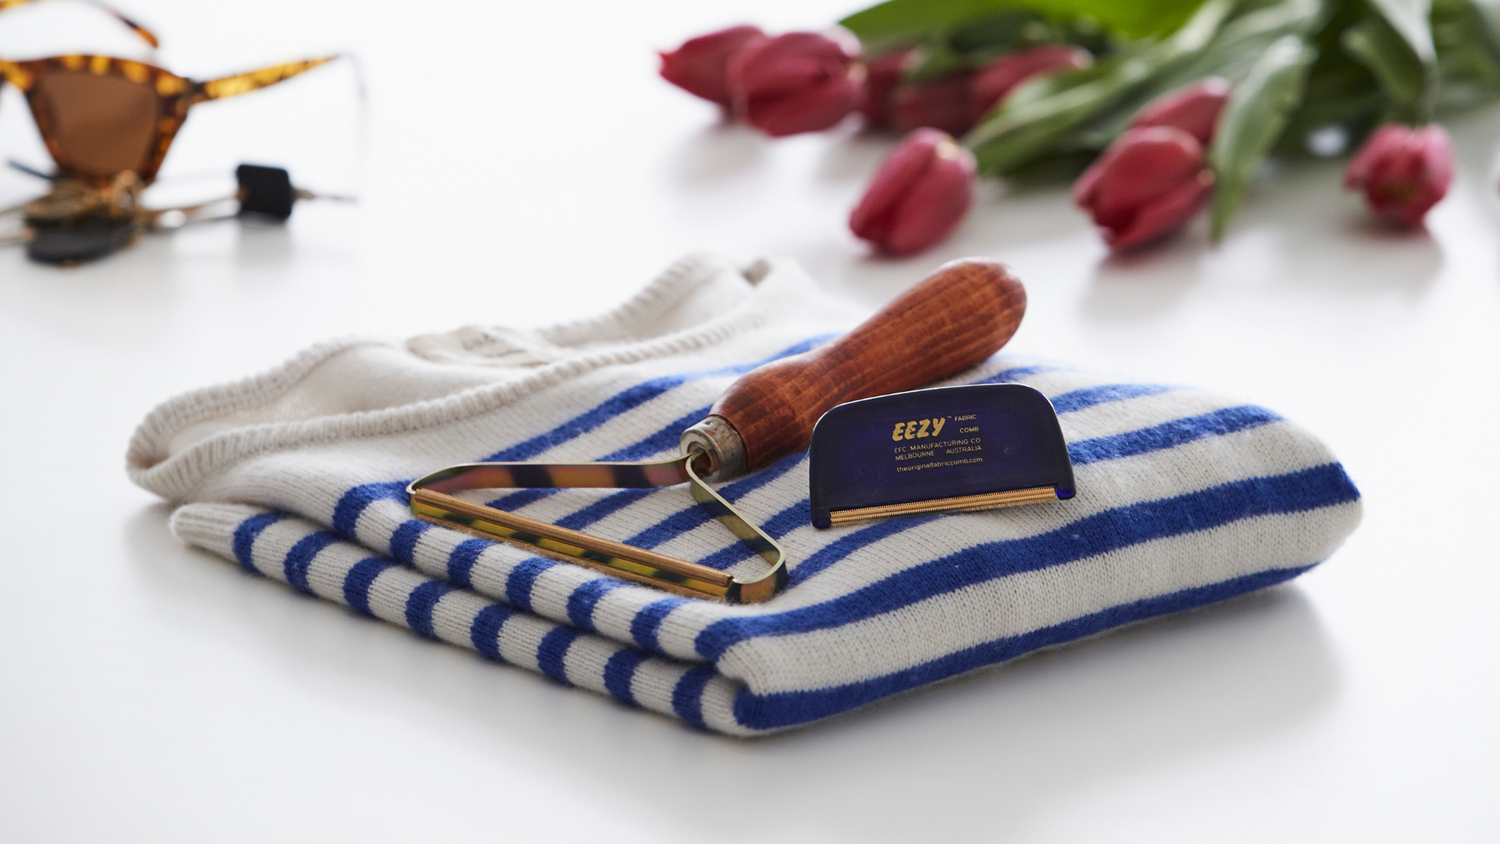 EEZY™ Fabric Combs are the World's best pilling, dog & cat hair removers from woollens, cashmere, couches, ottomans, rugs and carpets.  Hand assembled in Melbourne, Australia for over 40 years, an iconic trusted Australian brand that stands test of time.